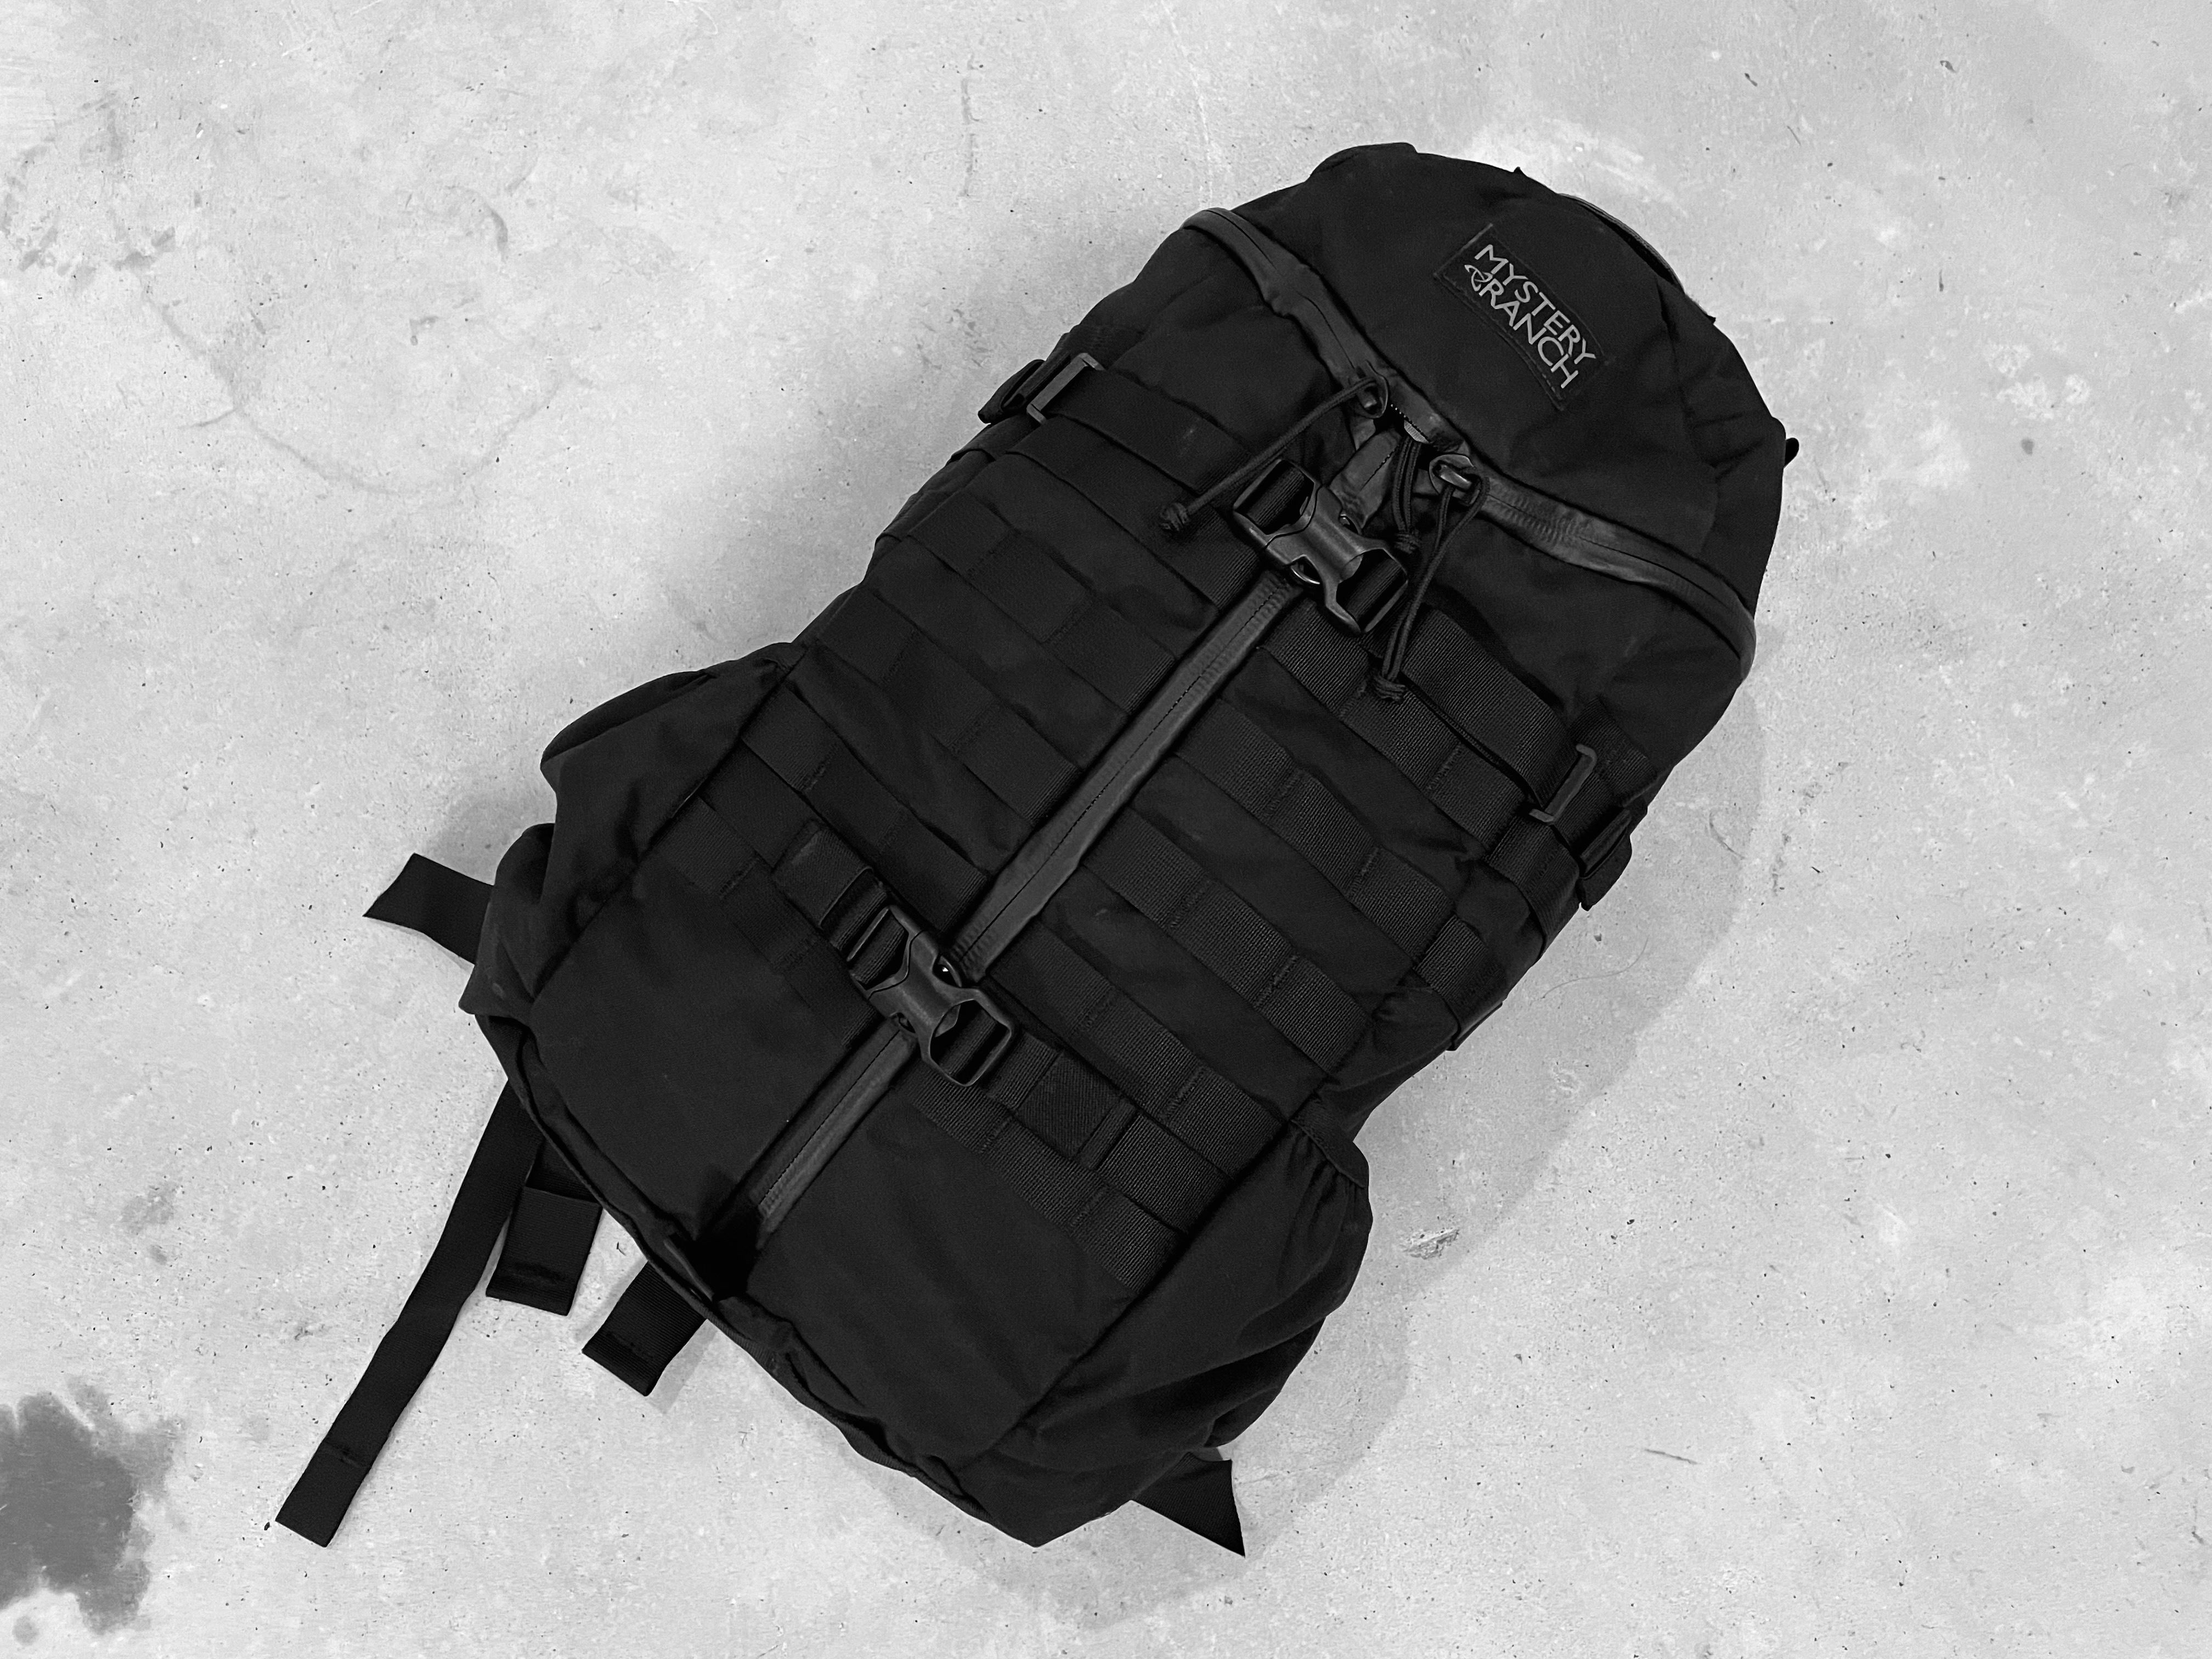 BugOutGear Travel Backpack Be Ready Tactical Black Bug Out Gear Large  Luggage